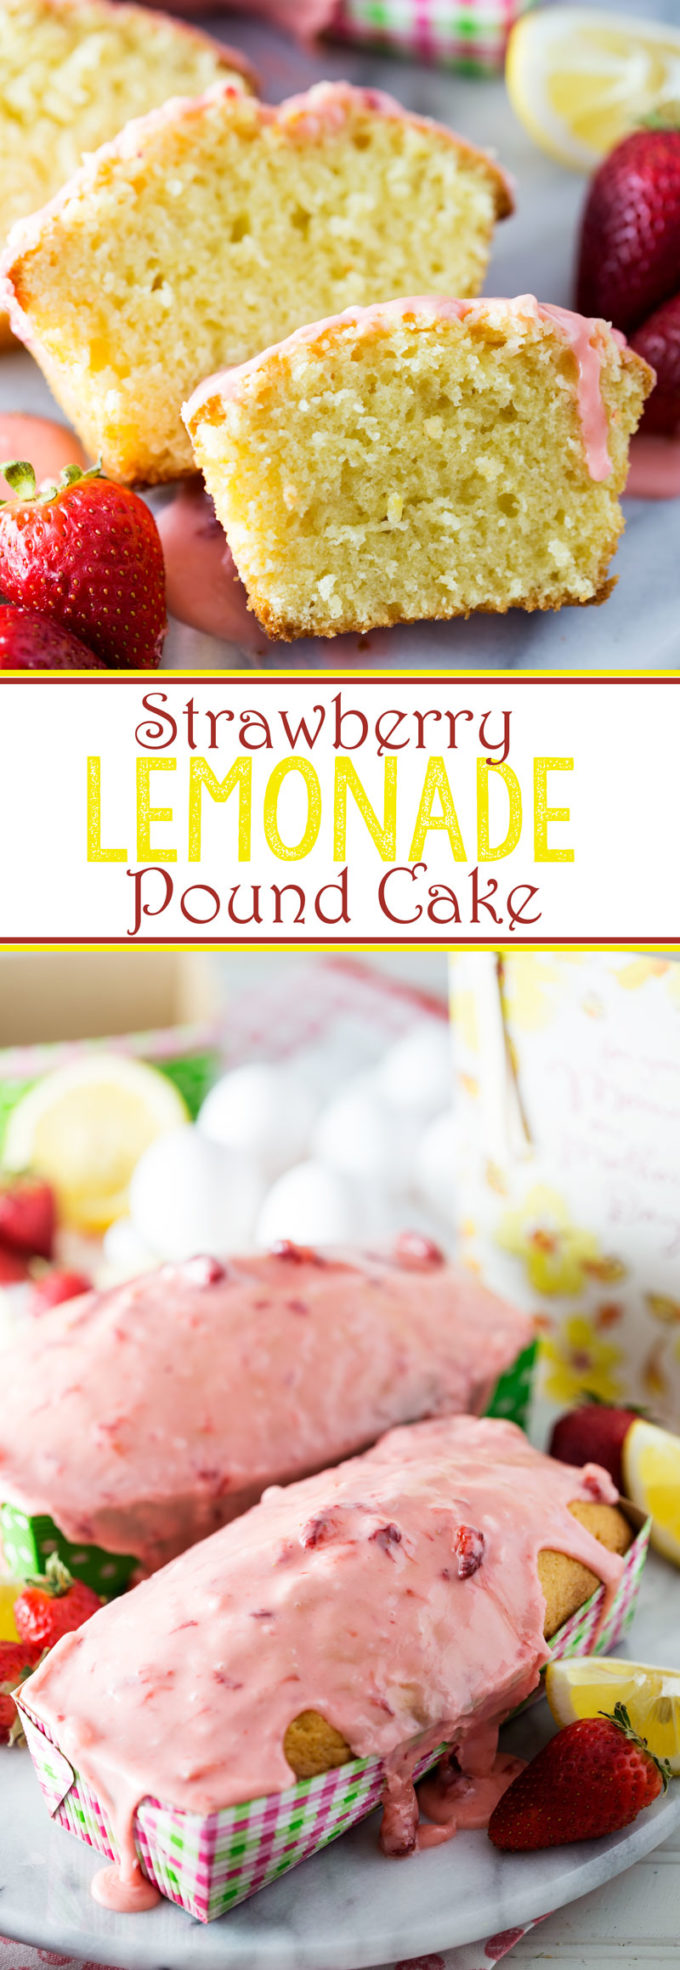 Sweet and lemon-y with a strawberry glaze, this Strawberry Lemonade Pound Cake makes for the perfect treat, and is ideal for gifting too